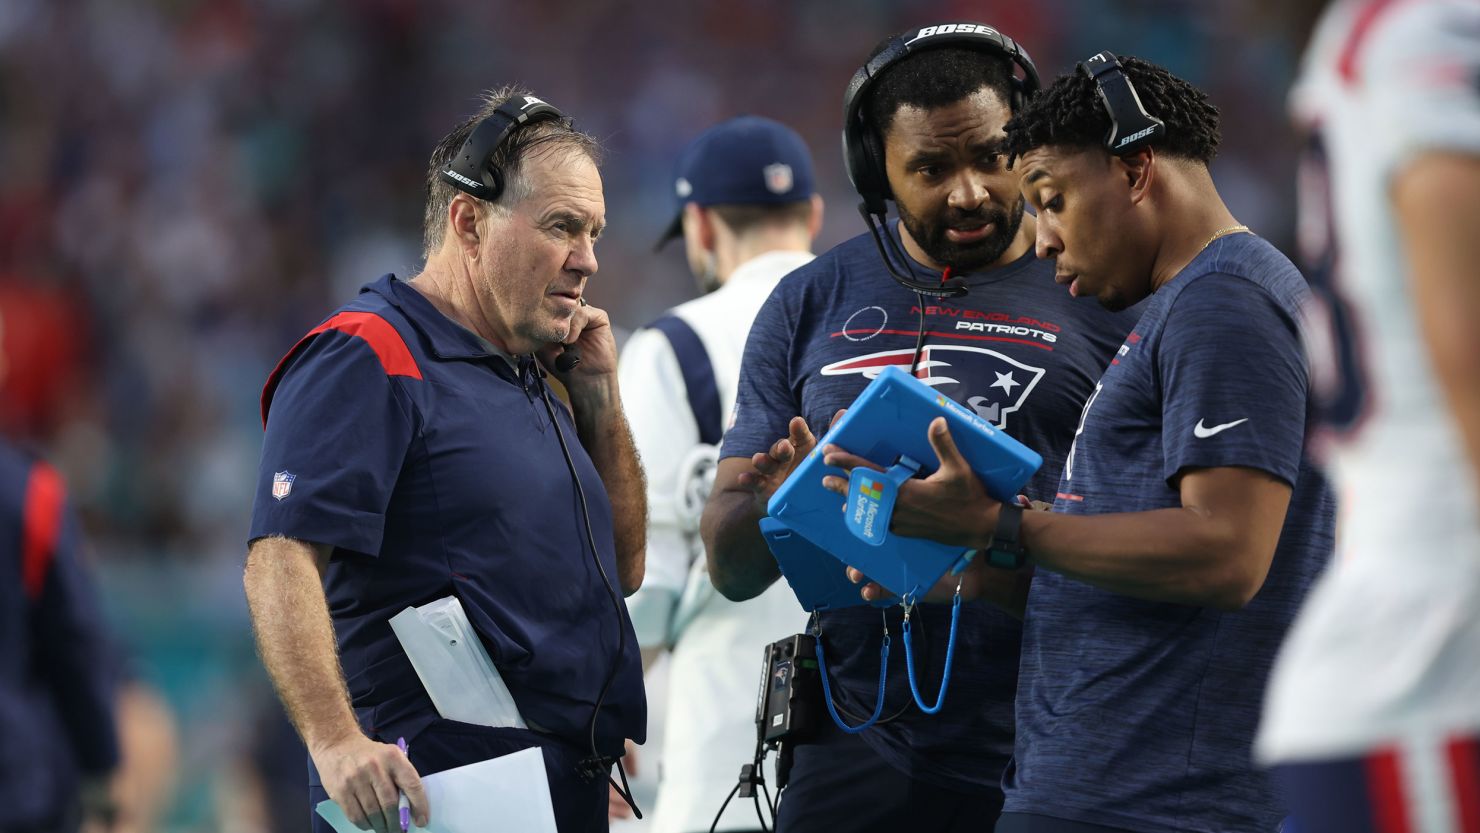 MIAMI GARDENS, FL - JANUARY 9: New England Patriots head coach Bill Belichick, inside linebackers coach Jerod Mayo, and defensive line coach DeMarcus Covington on the sideline  against the Miami Dolphins  at Hard Rock Stadium on January 9, 2022 in Miami Gardens, Florida. (Photo by Perry Knotts/Getty Images)